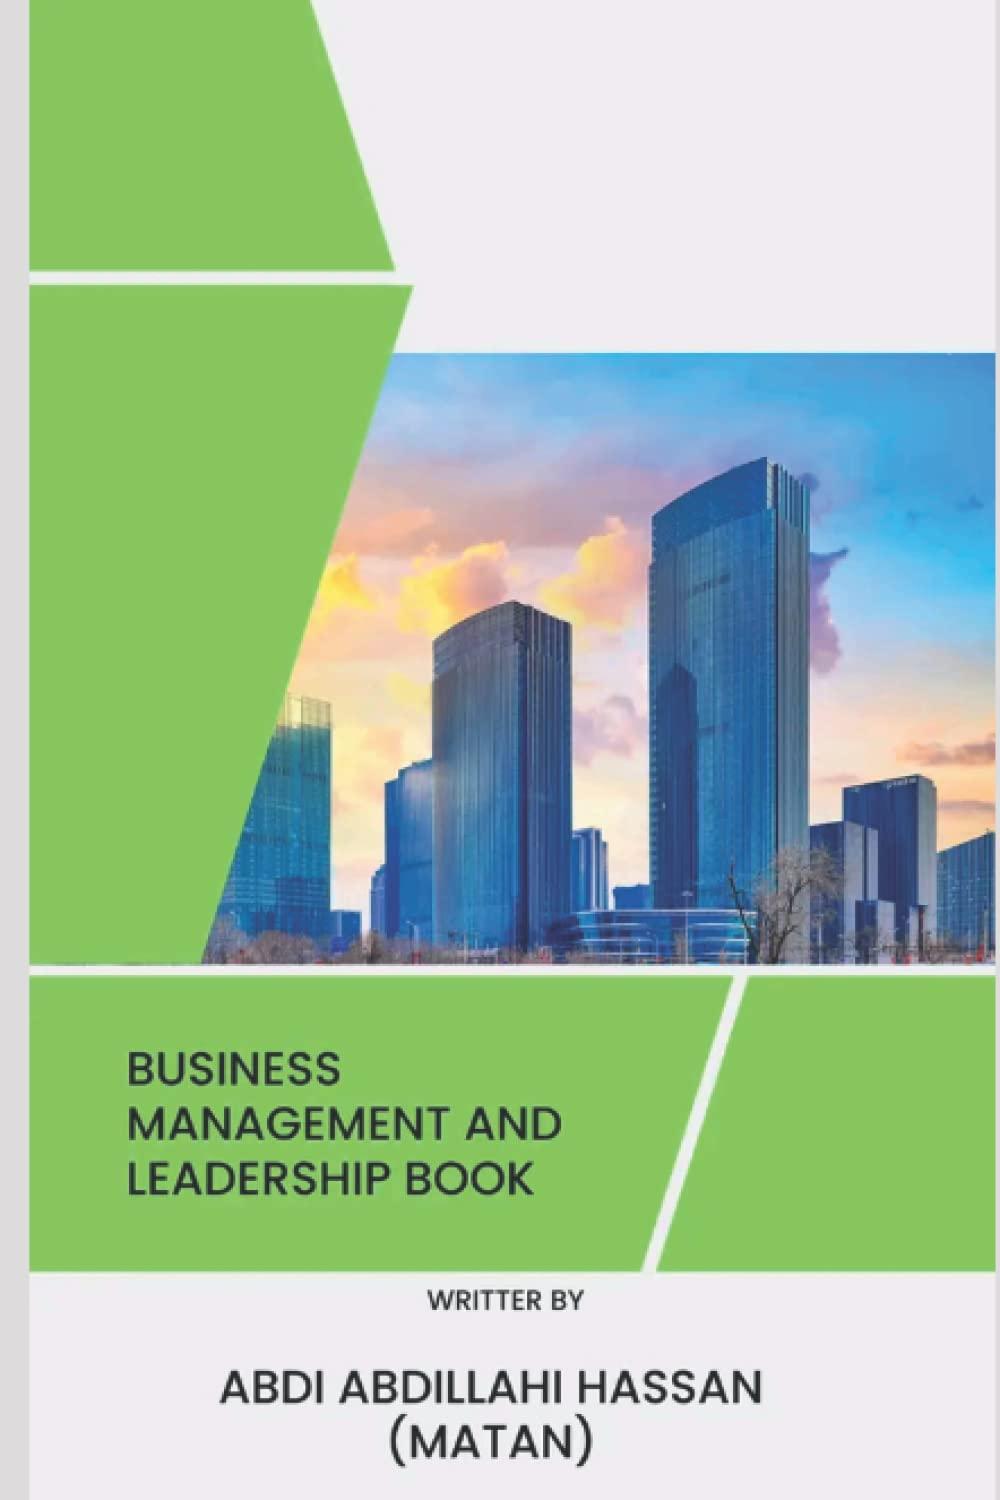 business management and leadership book 1st edition abdi abdillahi hassan b0bmjmwh6k, 979-8363755880